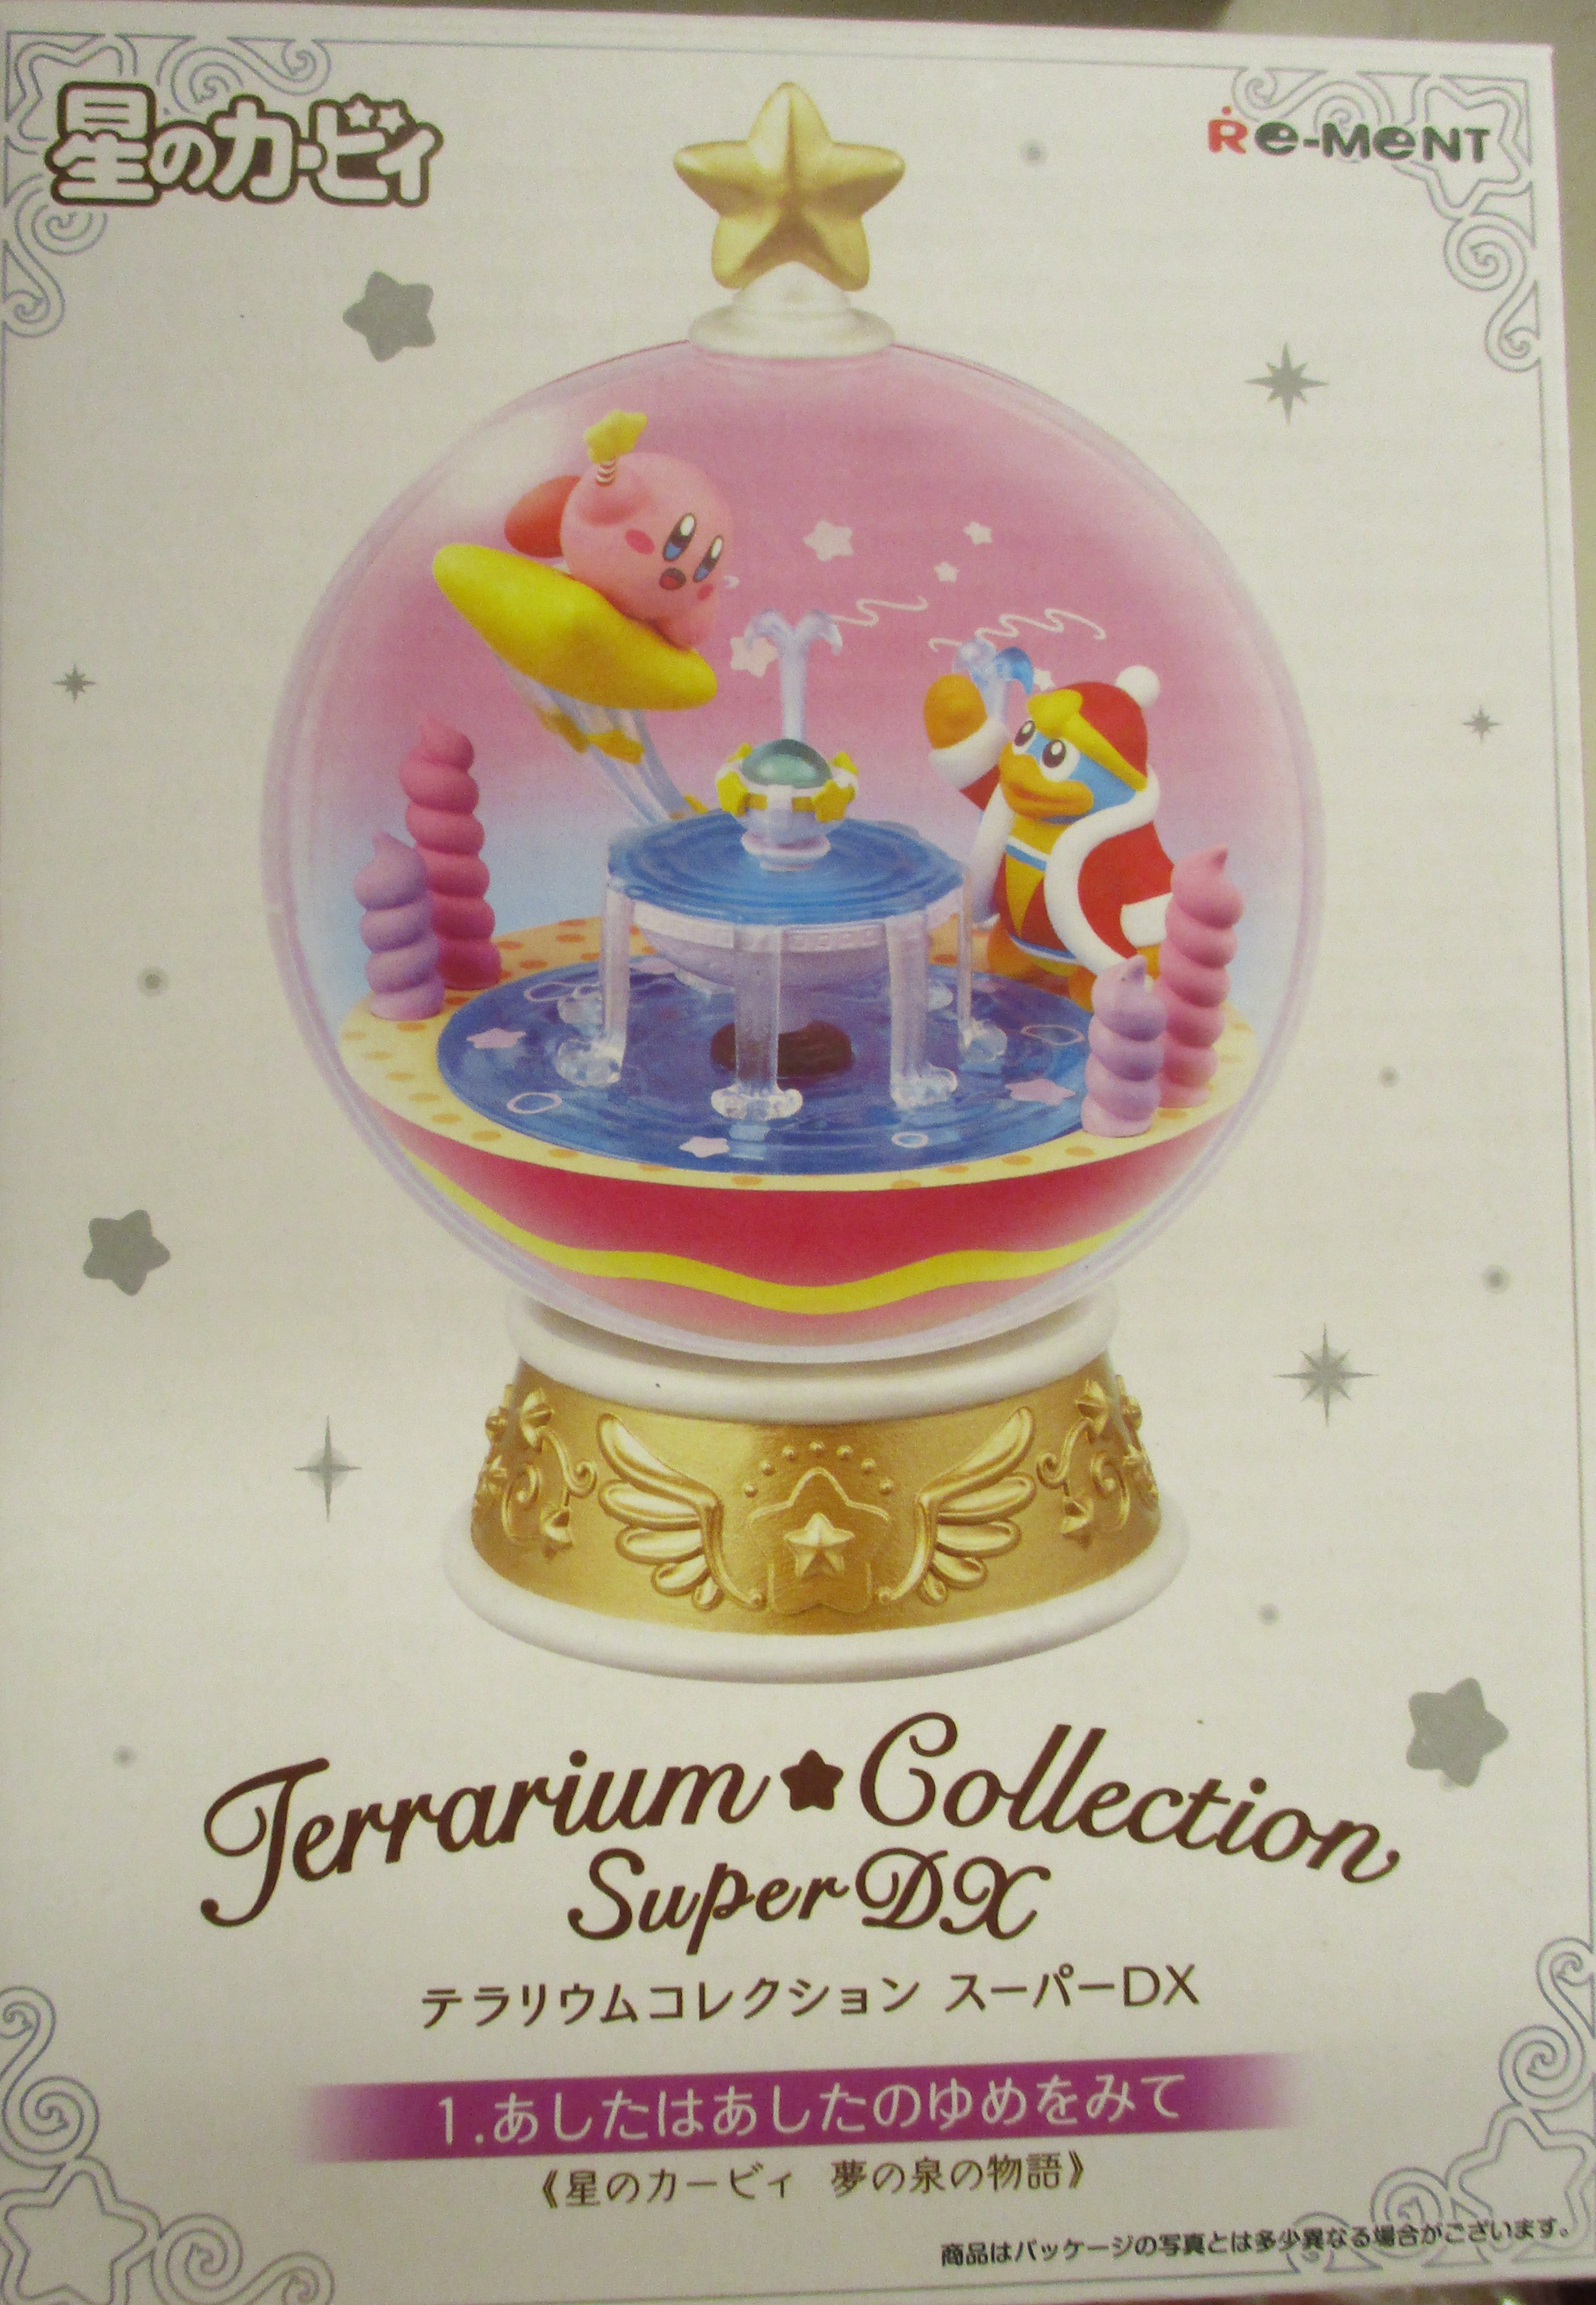 Re-Ment Kirby Terrarium Collection Super DX 1.Dream a New Dream For Tomorrow